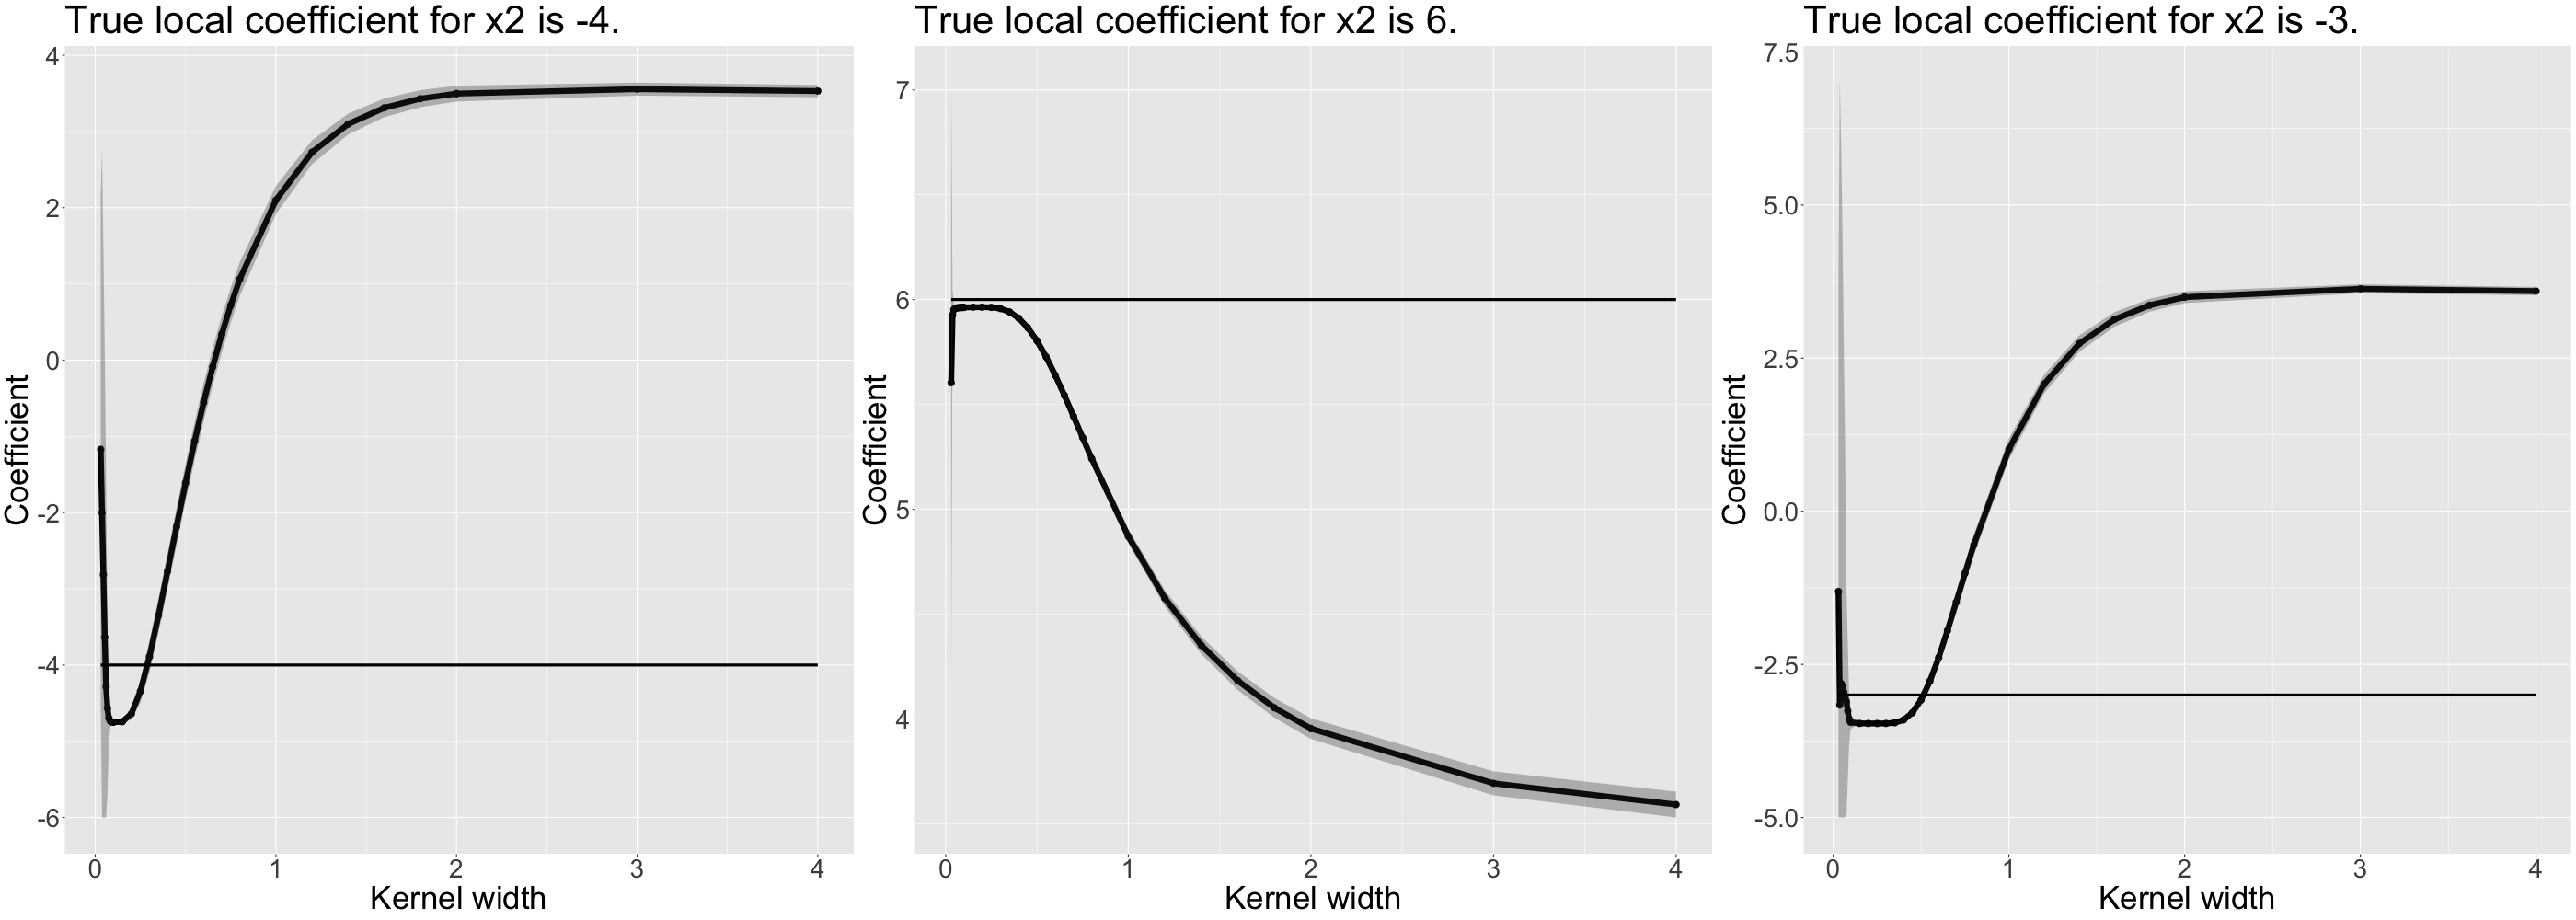 Simulated data: Local coefficients and confidence intervals for different kernel widths explaining non-linear relationship (for $x_2$).